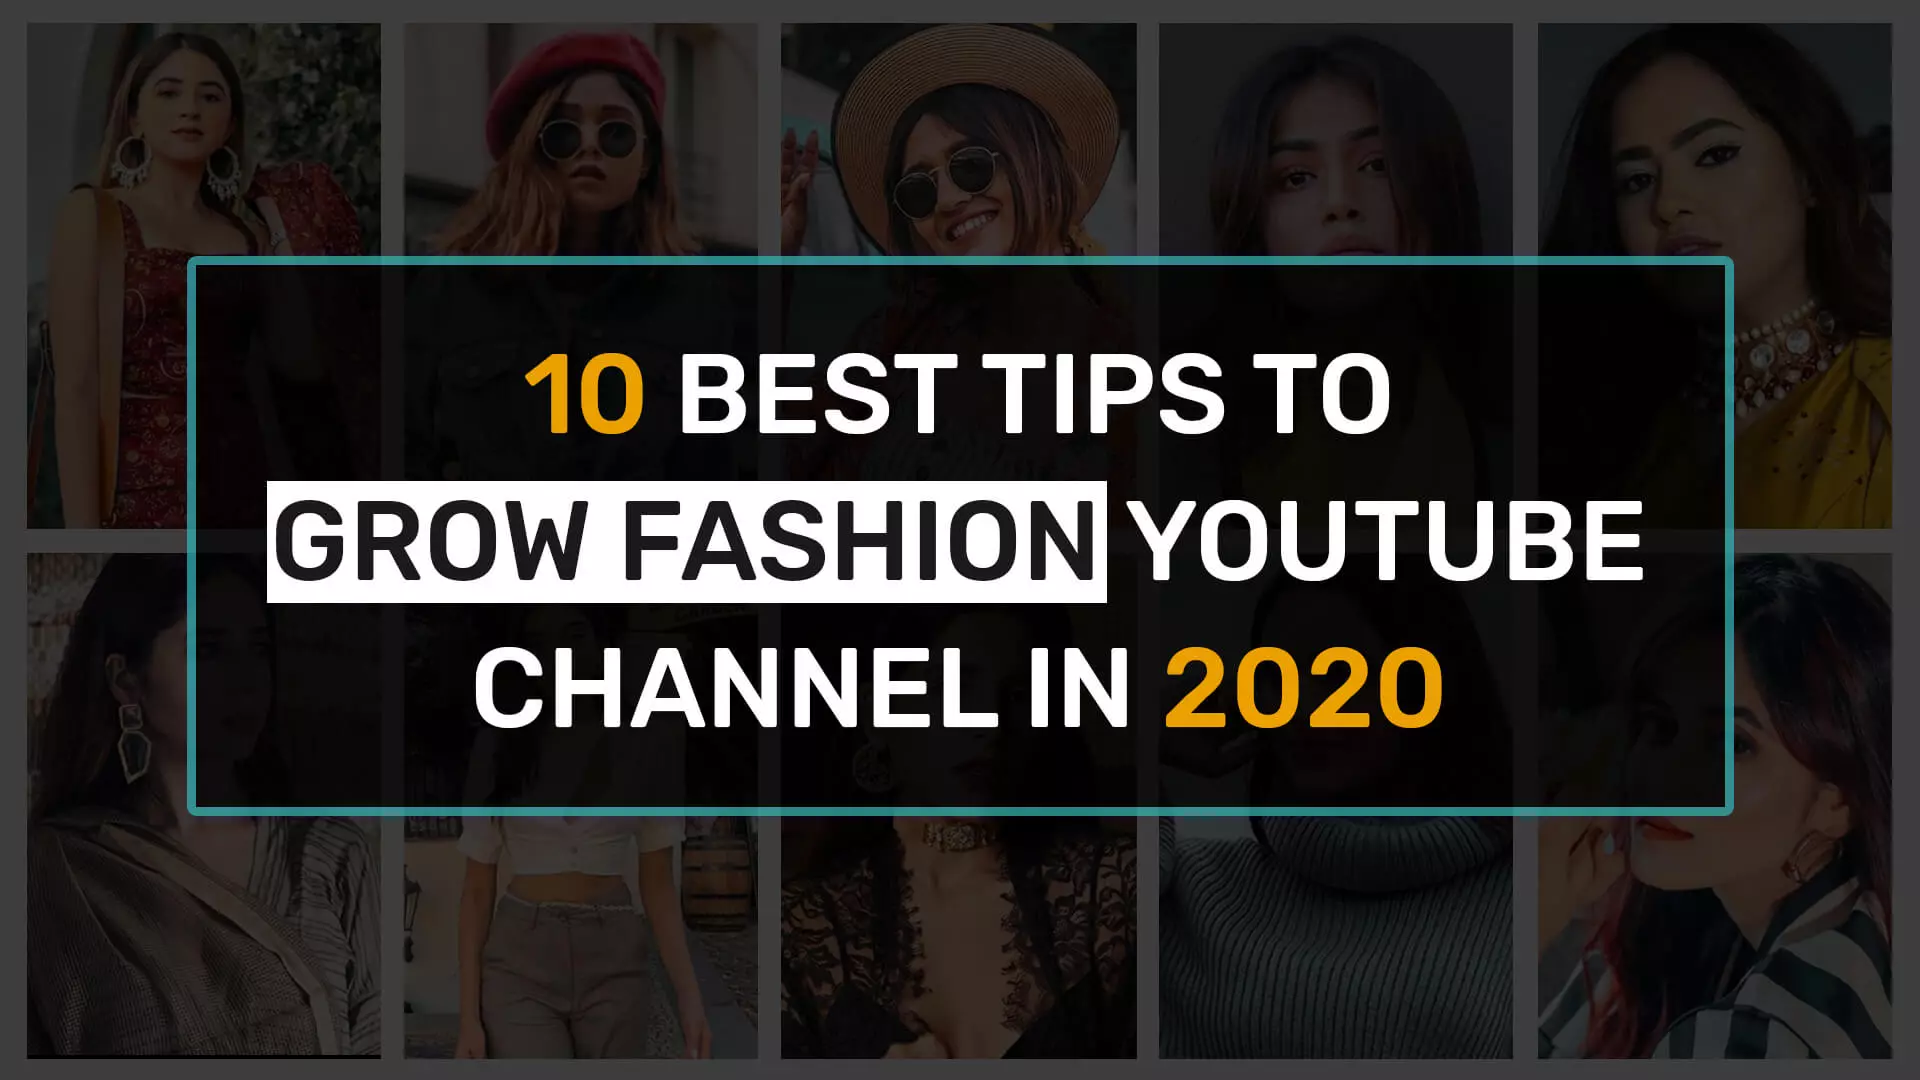 How to grow fashion YouTube Channel